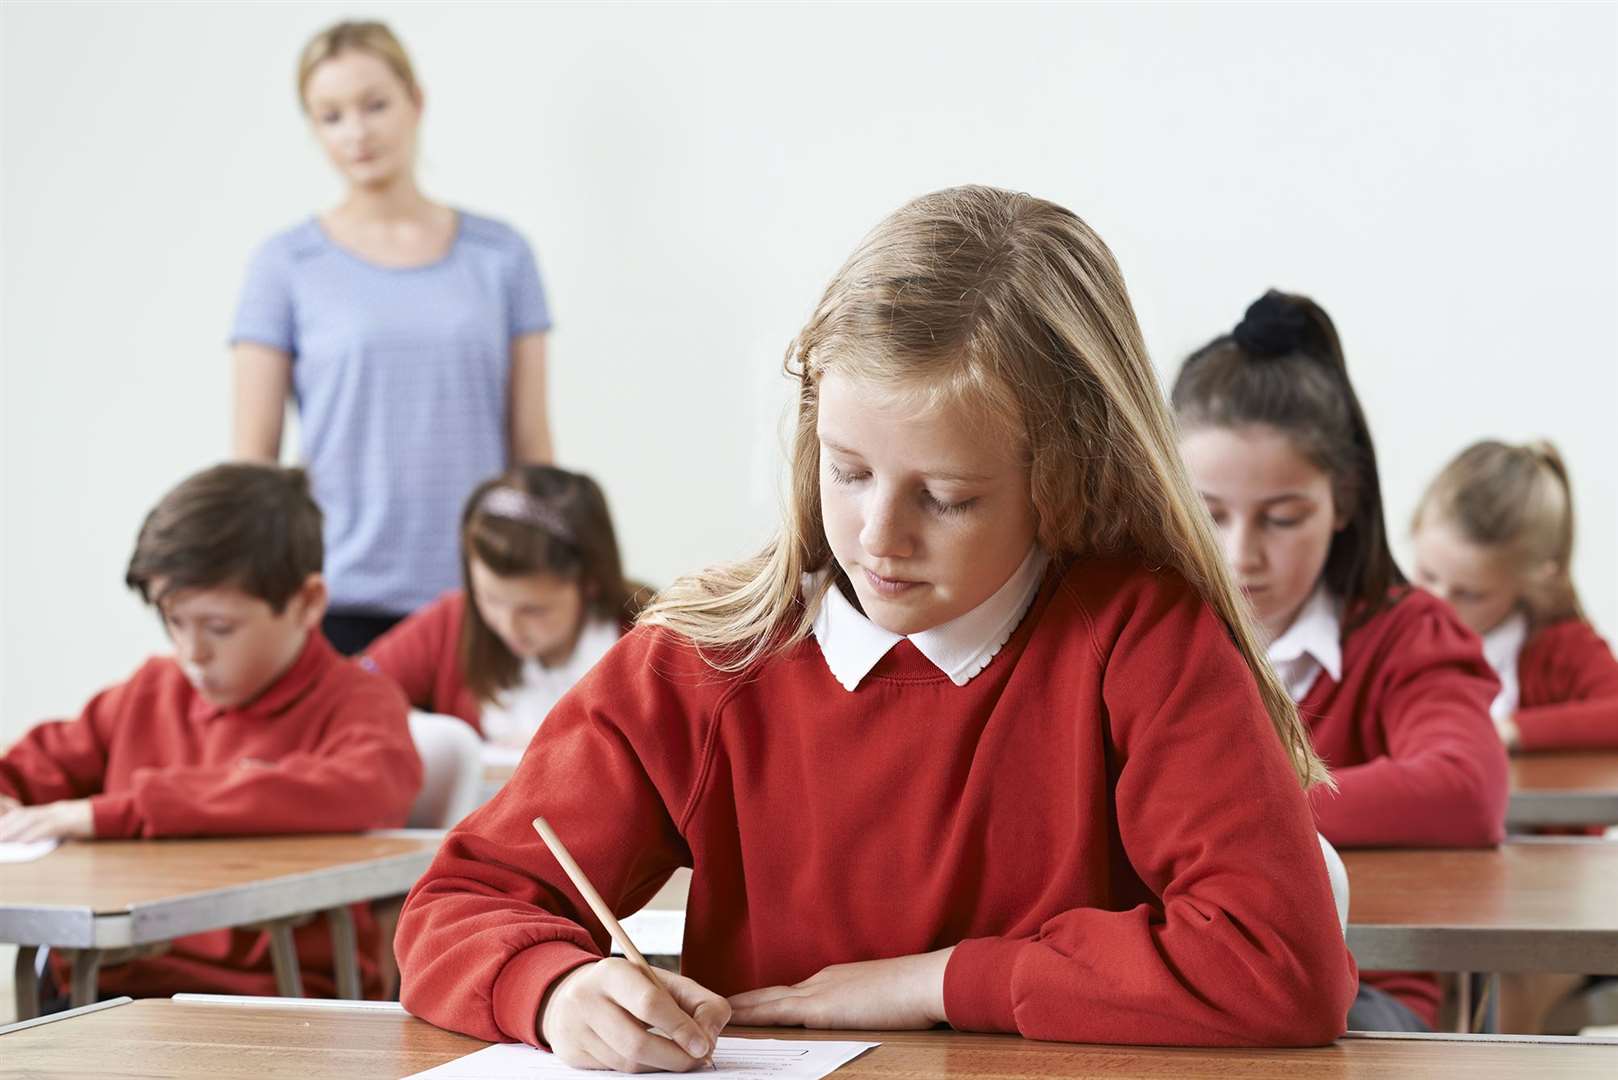 Children in Medway will be the first to receive test results